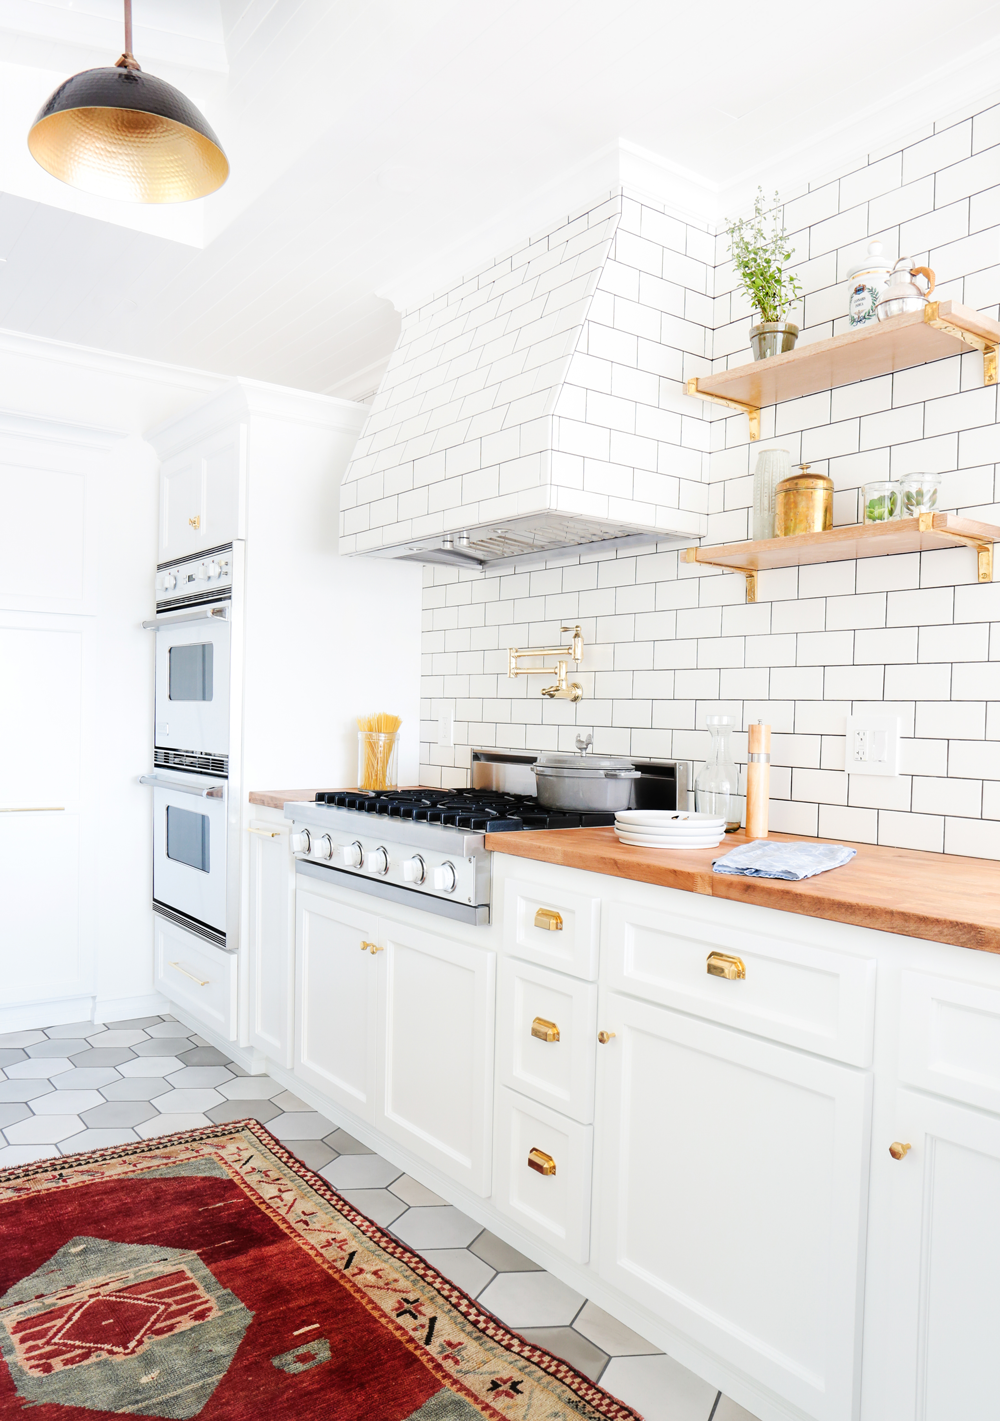 Top 20 Kitchen Trends for 20 That Our Editors Love